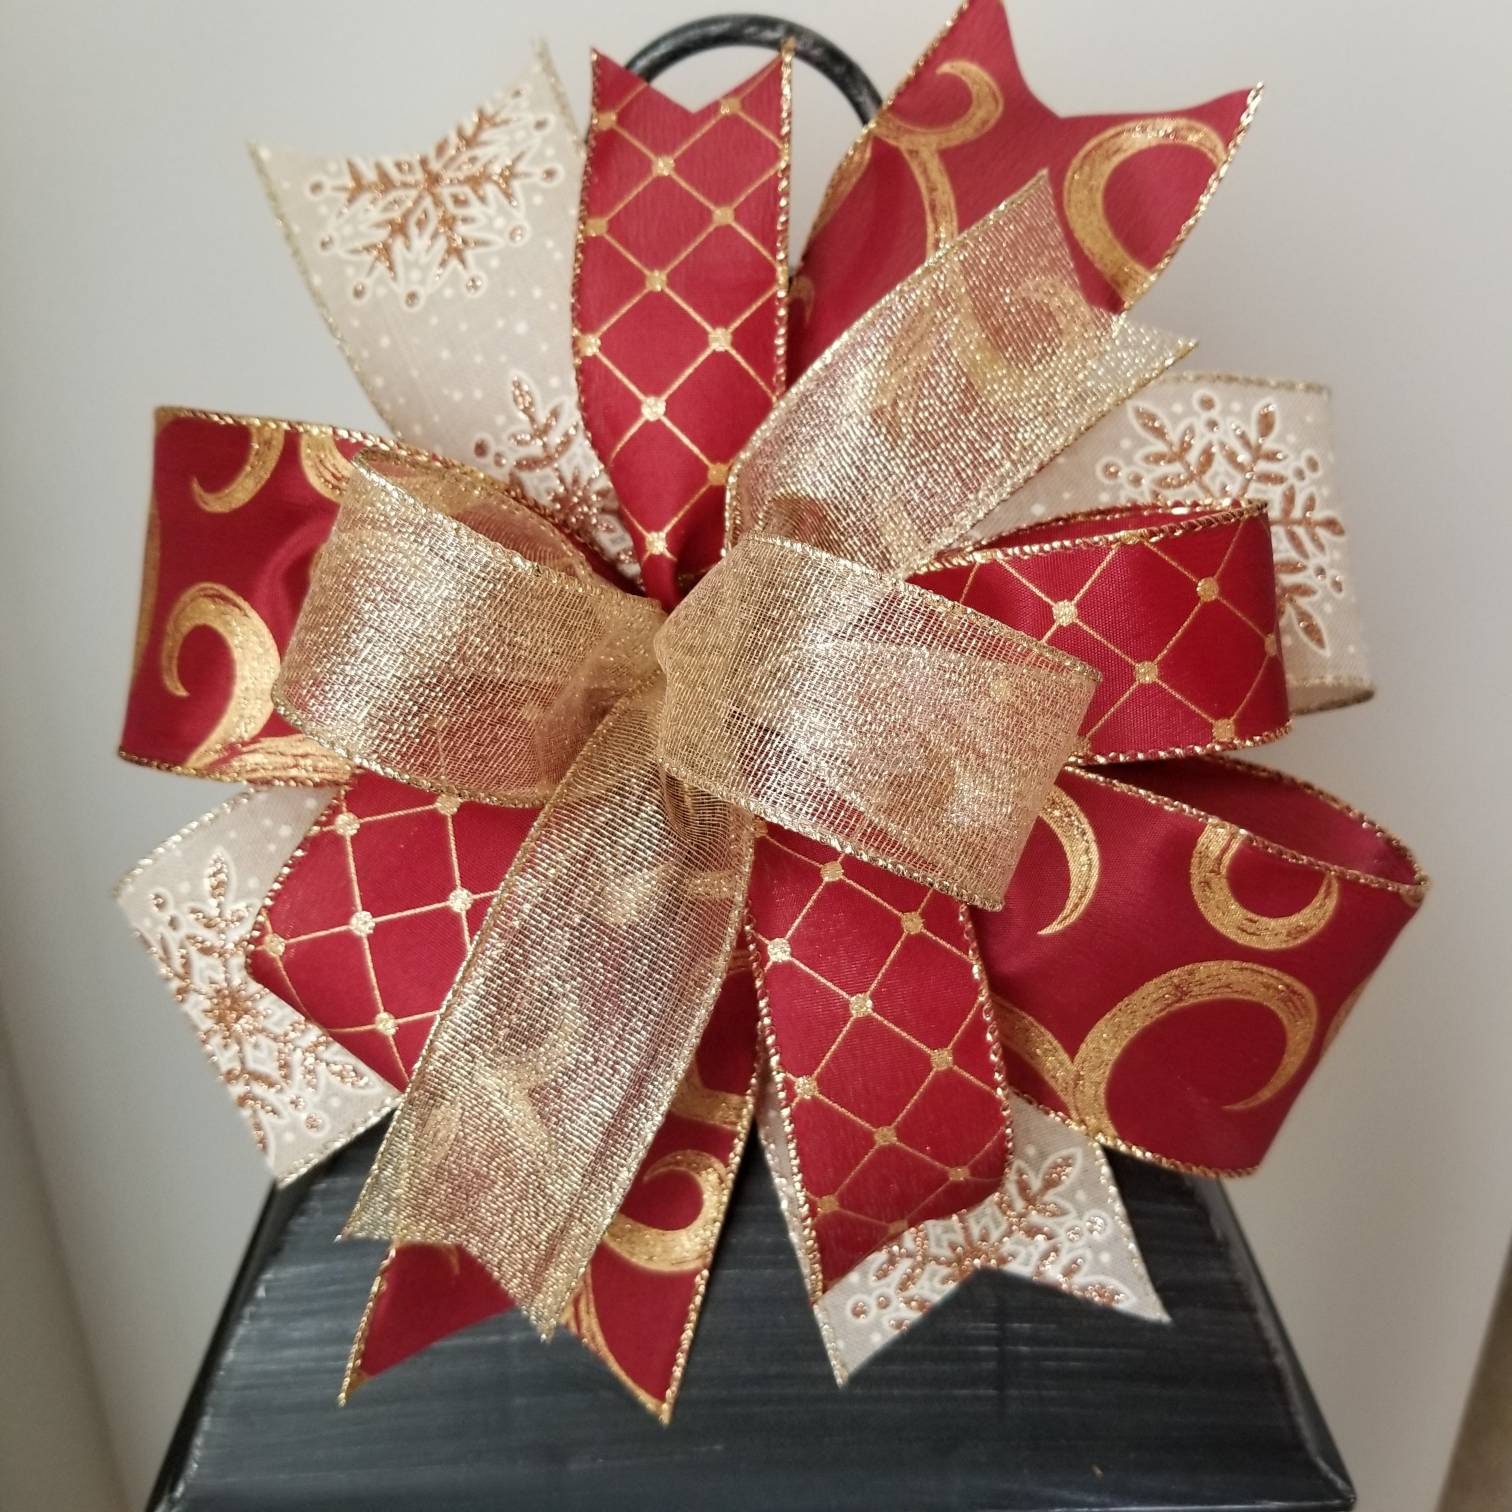 Red Bow with Gold Trim 12